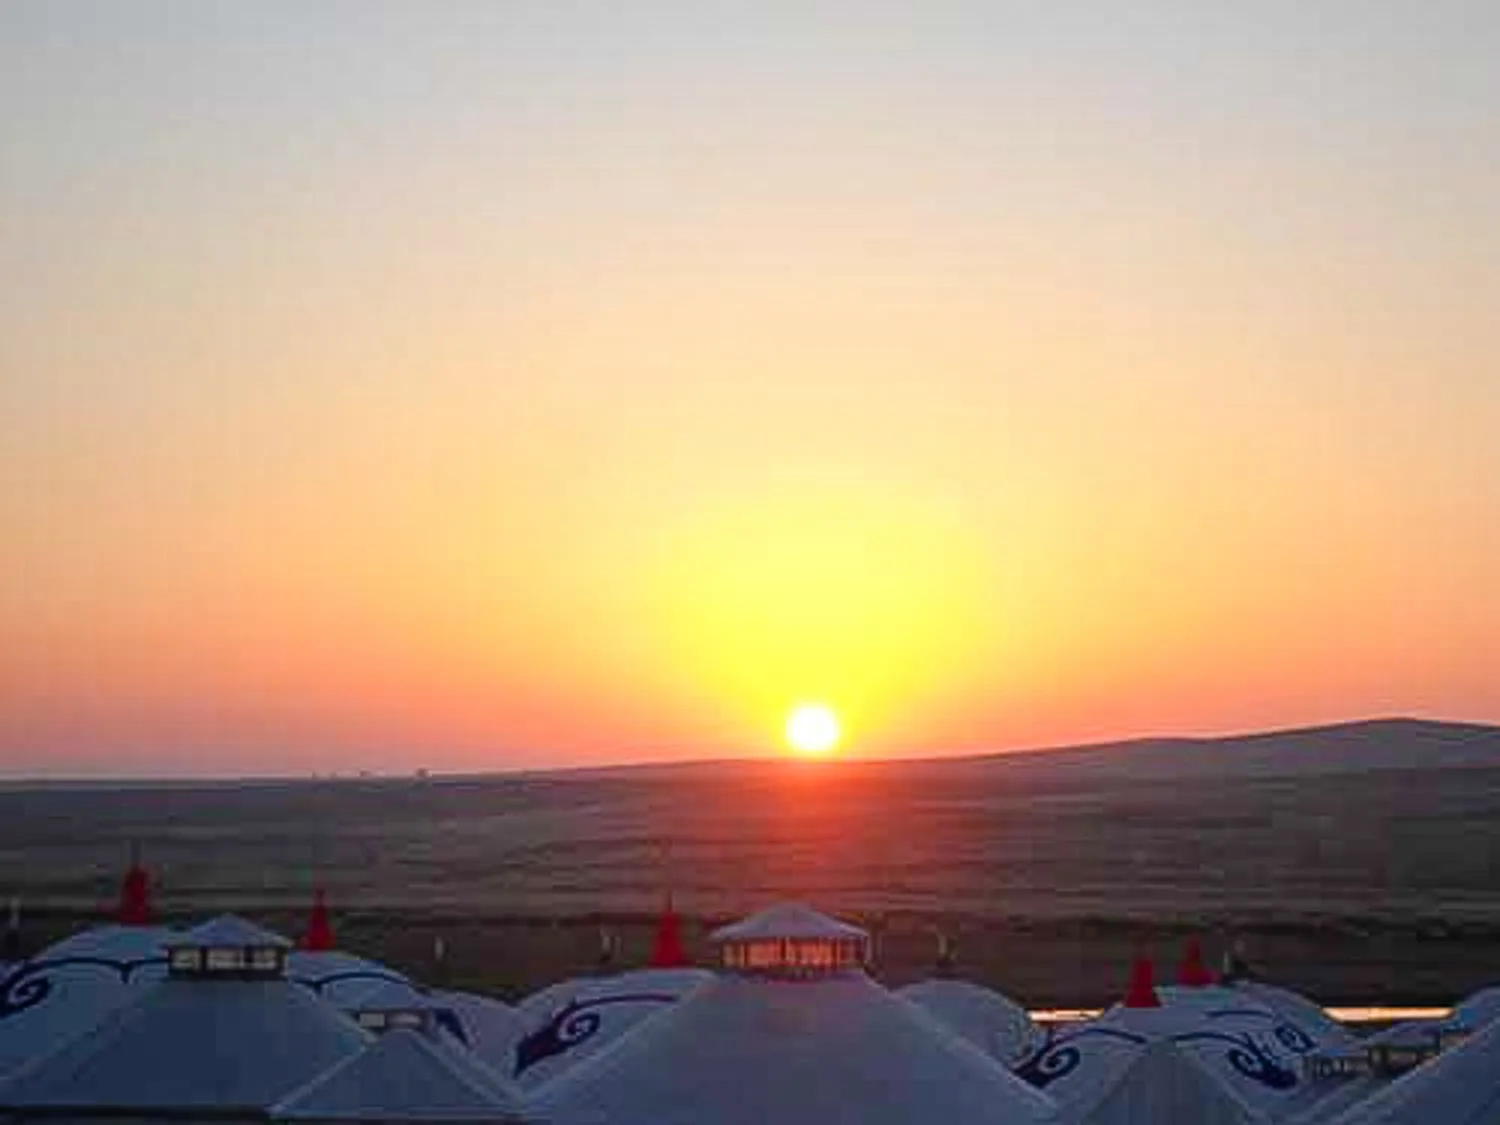 Sunrise over the steppes in Inner Mongolia, China during a mini-vacation with a colleague.